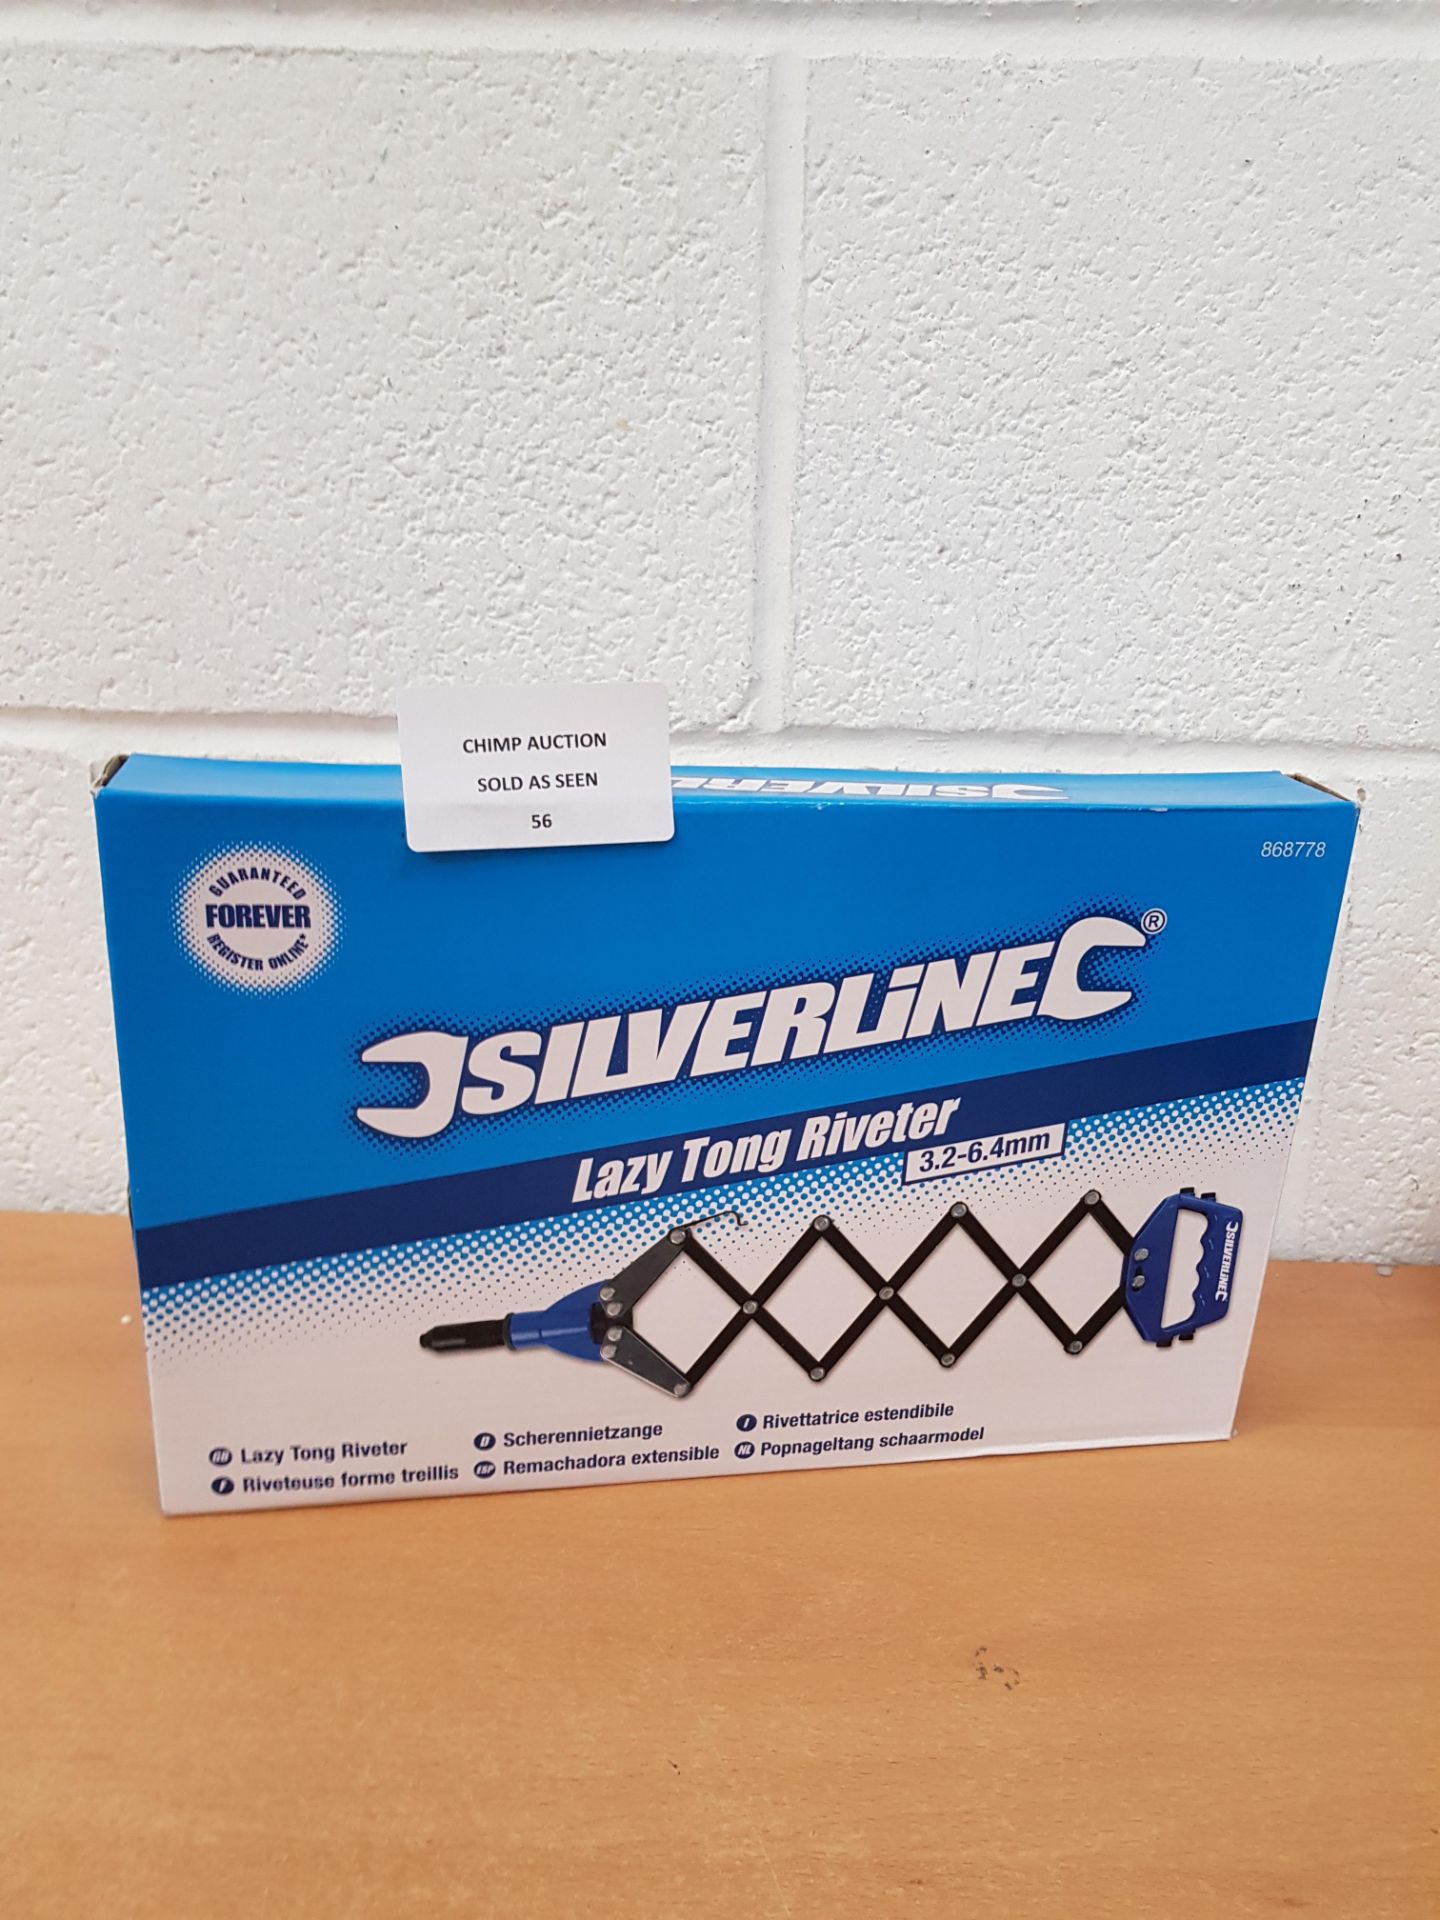 Silverline 868778 Lazy Tong Riveter 3.2-6.4 mm